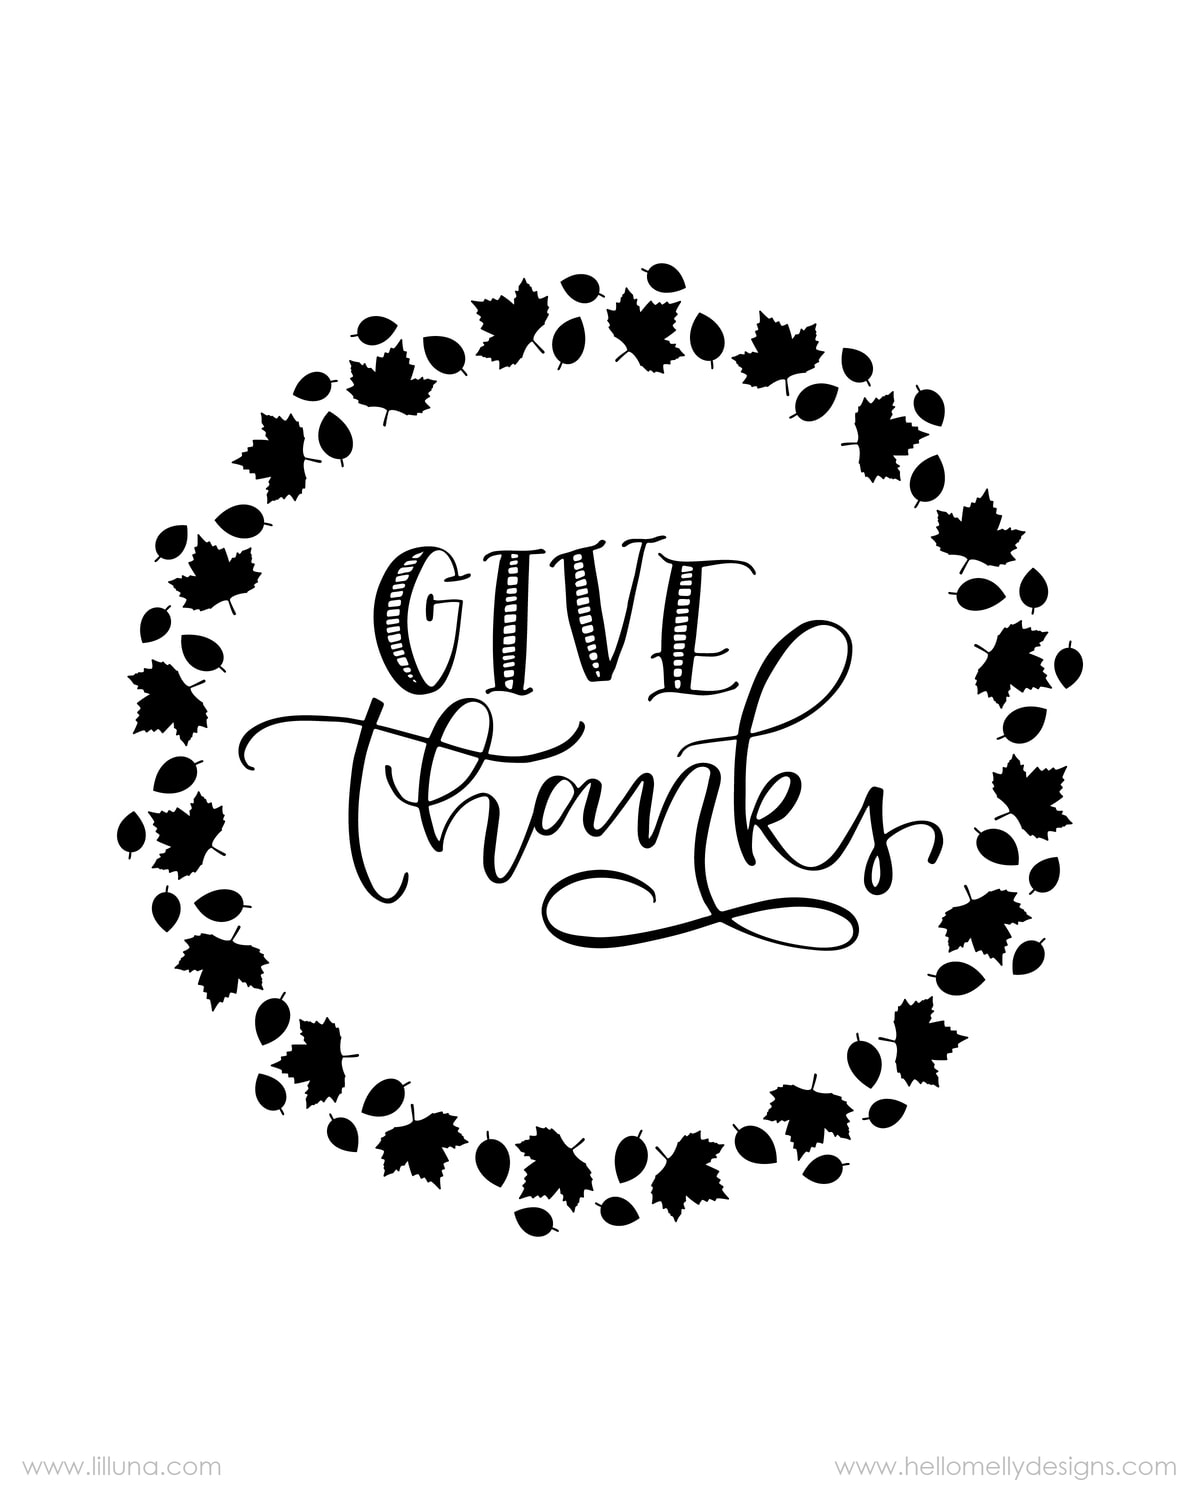 FREE Give Thanks Prints available to download in 3 colors - perfect to print, frame and display for Thanksgiving!